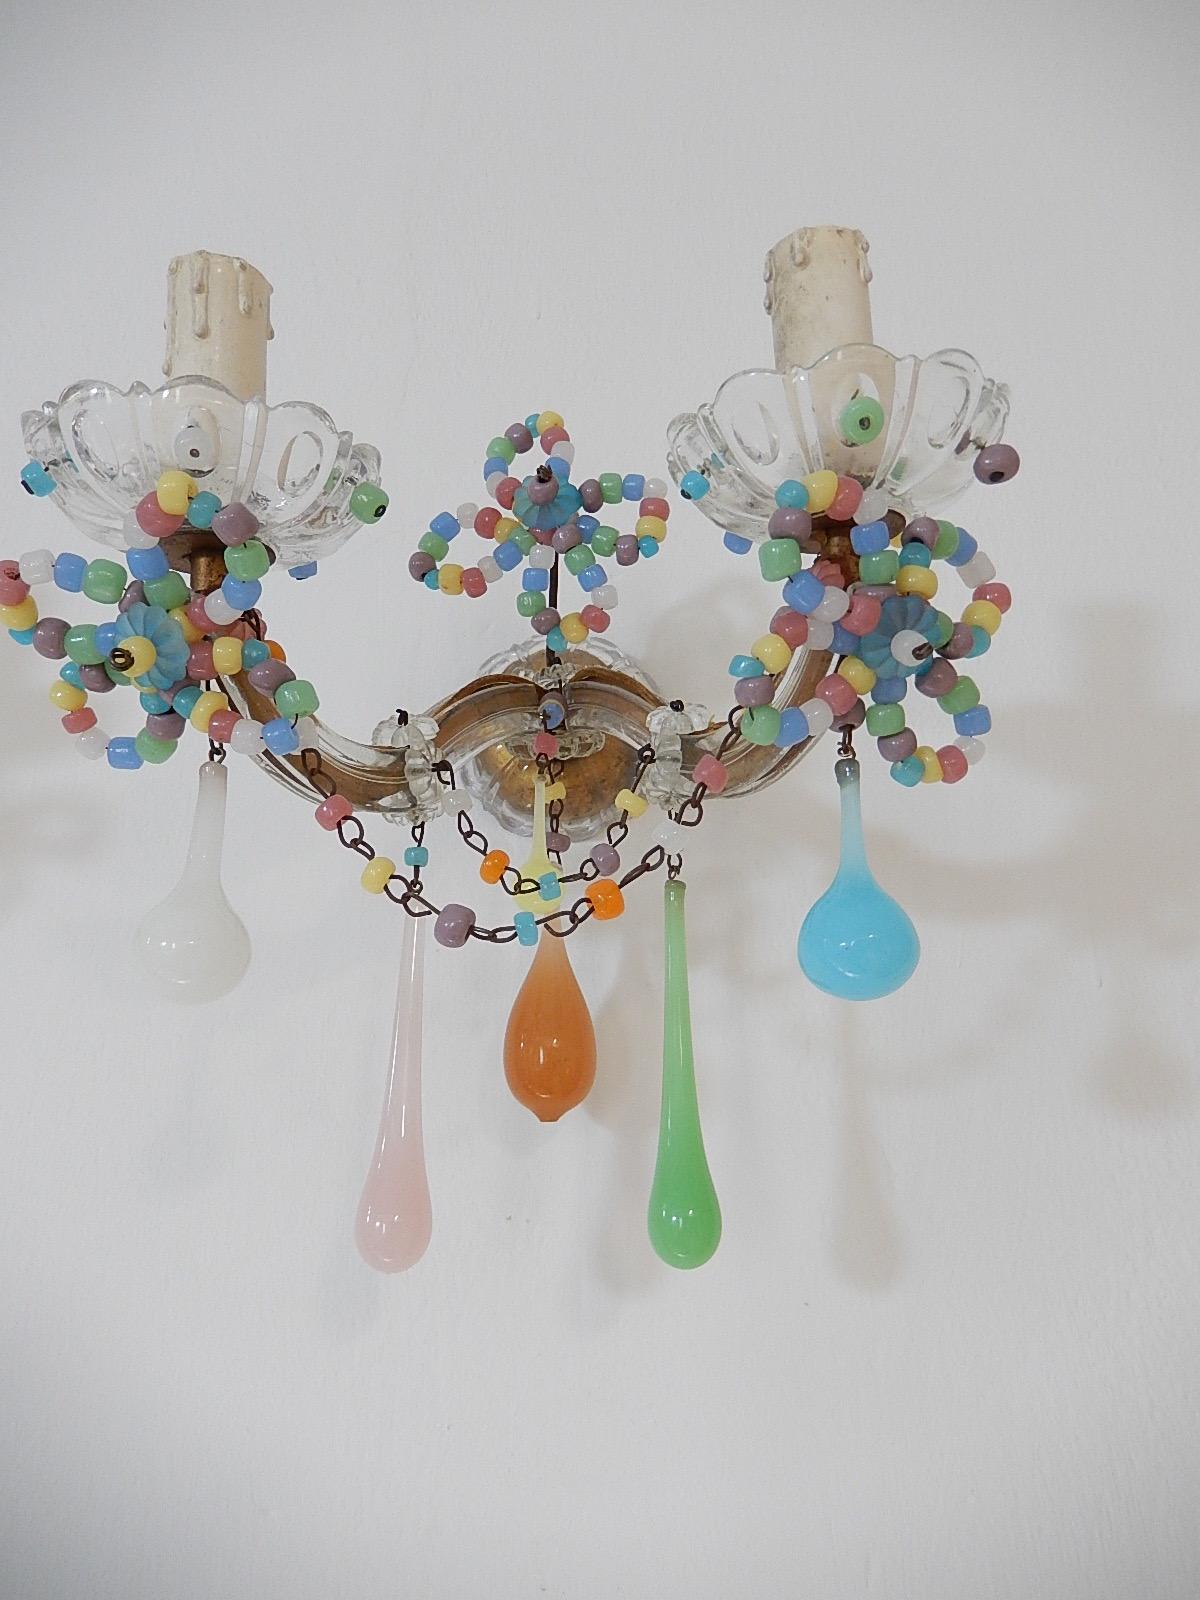 Will be re-wired with appropriate sockets for the country and ready to hang! Housing two lights each, sitting in crystal bobeches with opaline beads. Adorning rare opaline drops in different colors and swags of macaroni beads in opaline as well.